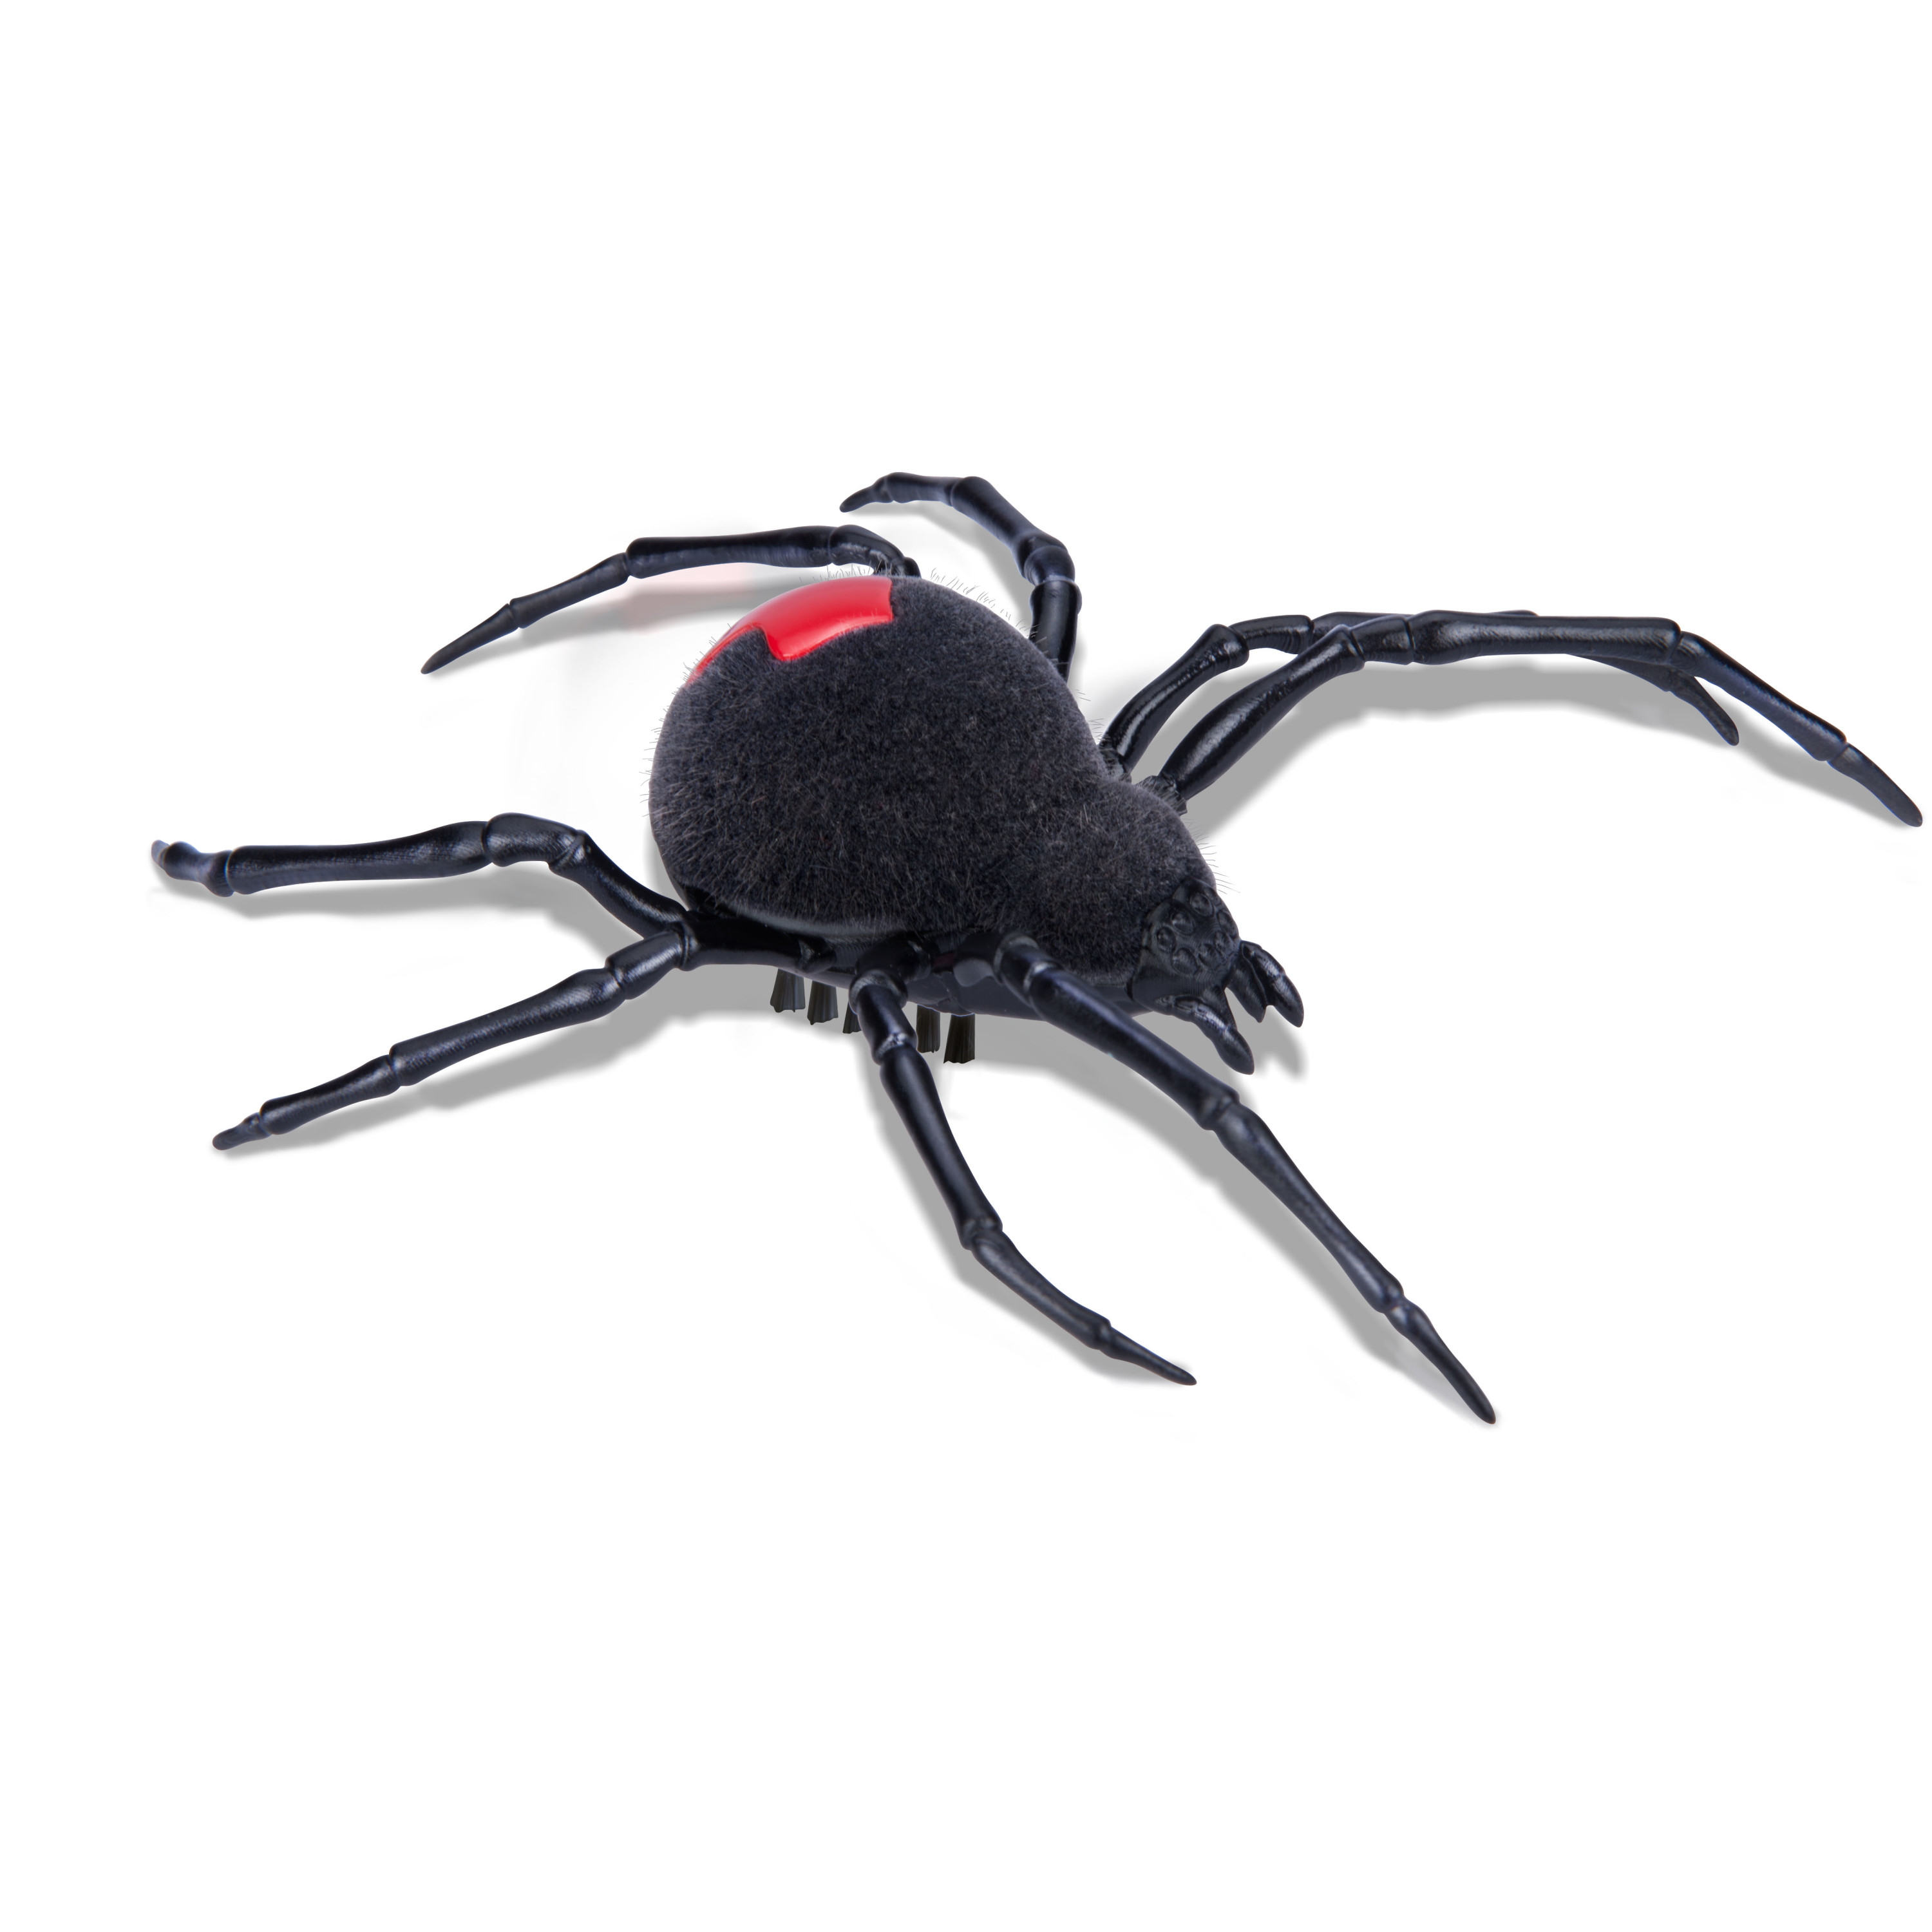 ZURU Robo Alive Battery Powered Crawling Spider Robotic Toy - Electronic Pet - image 3 of 8